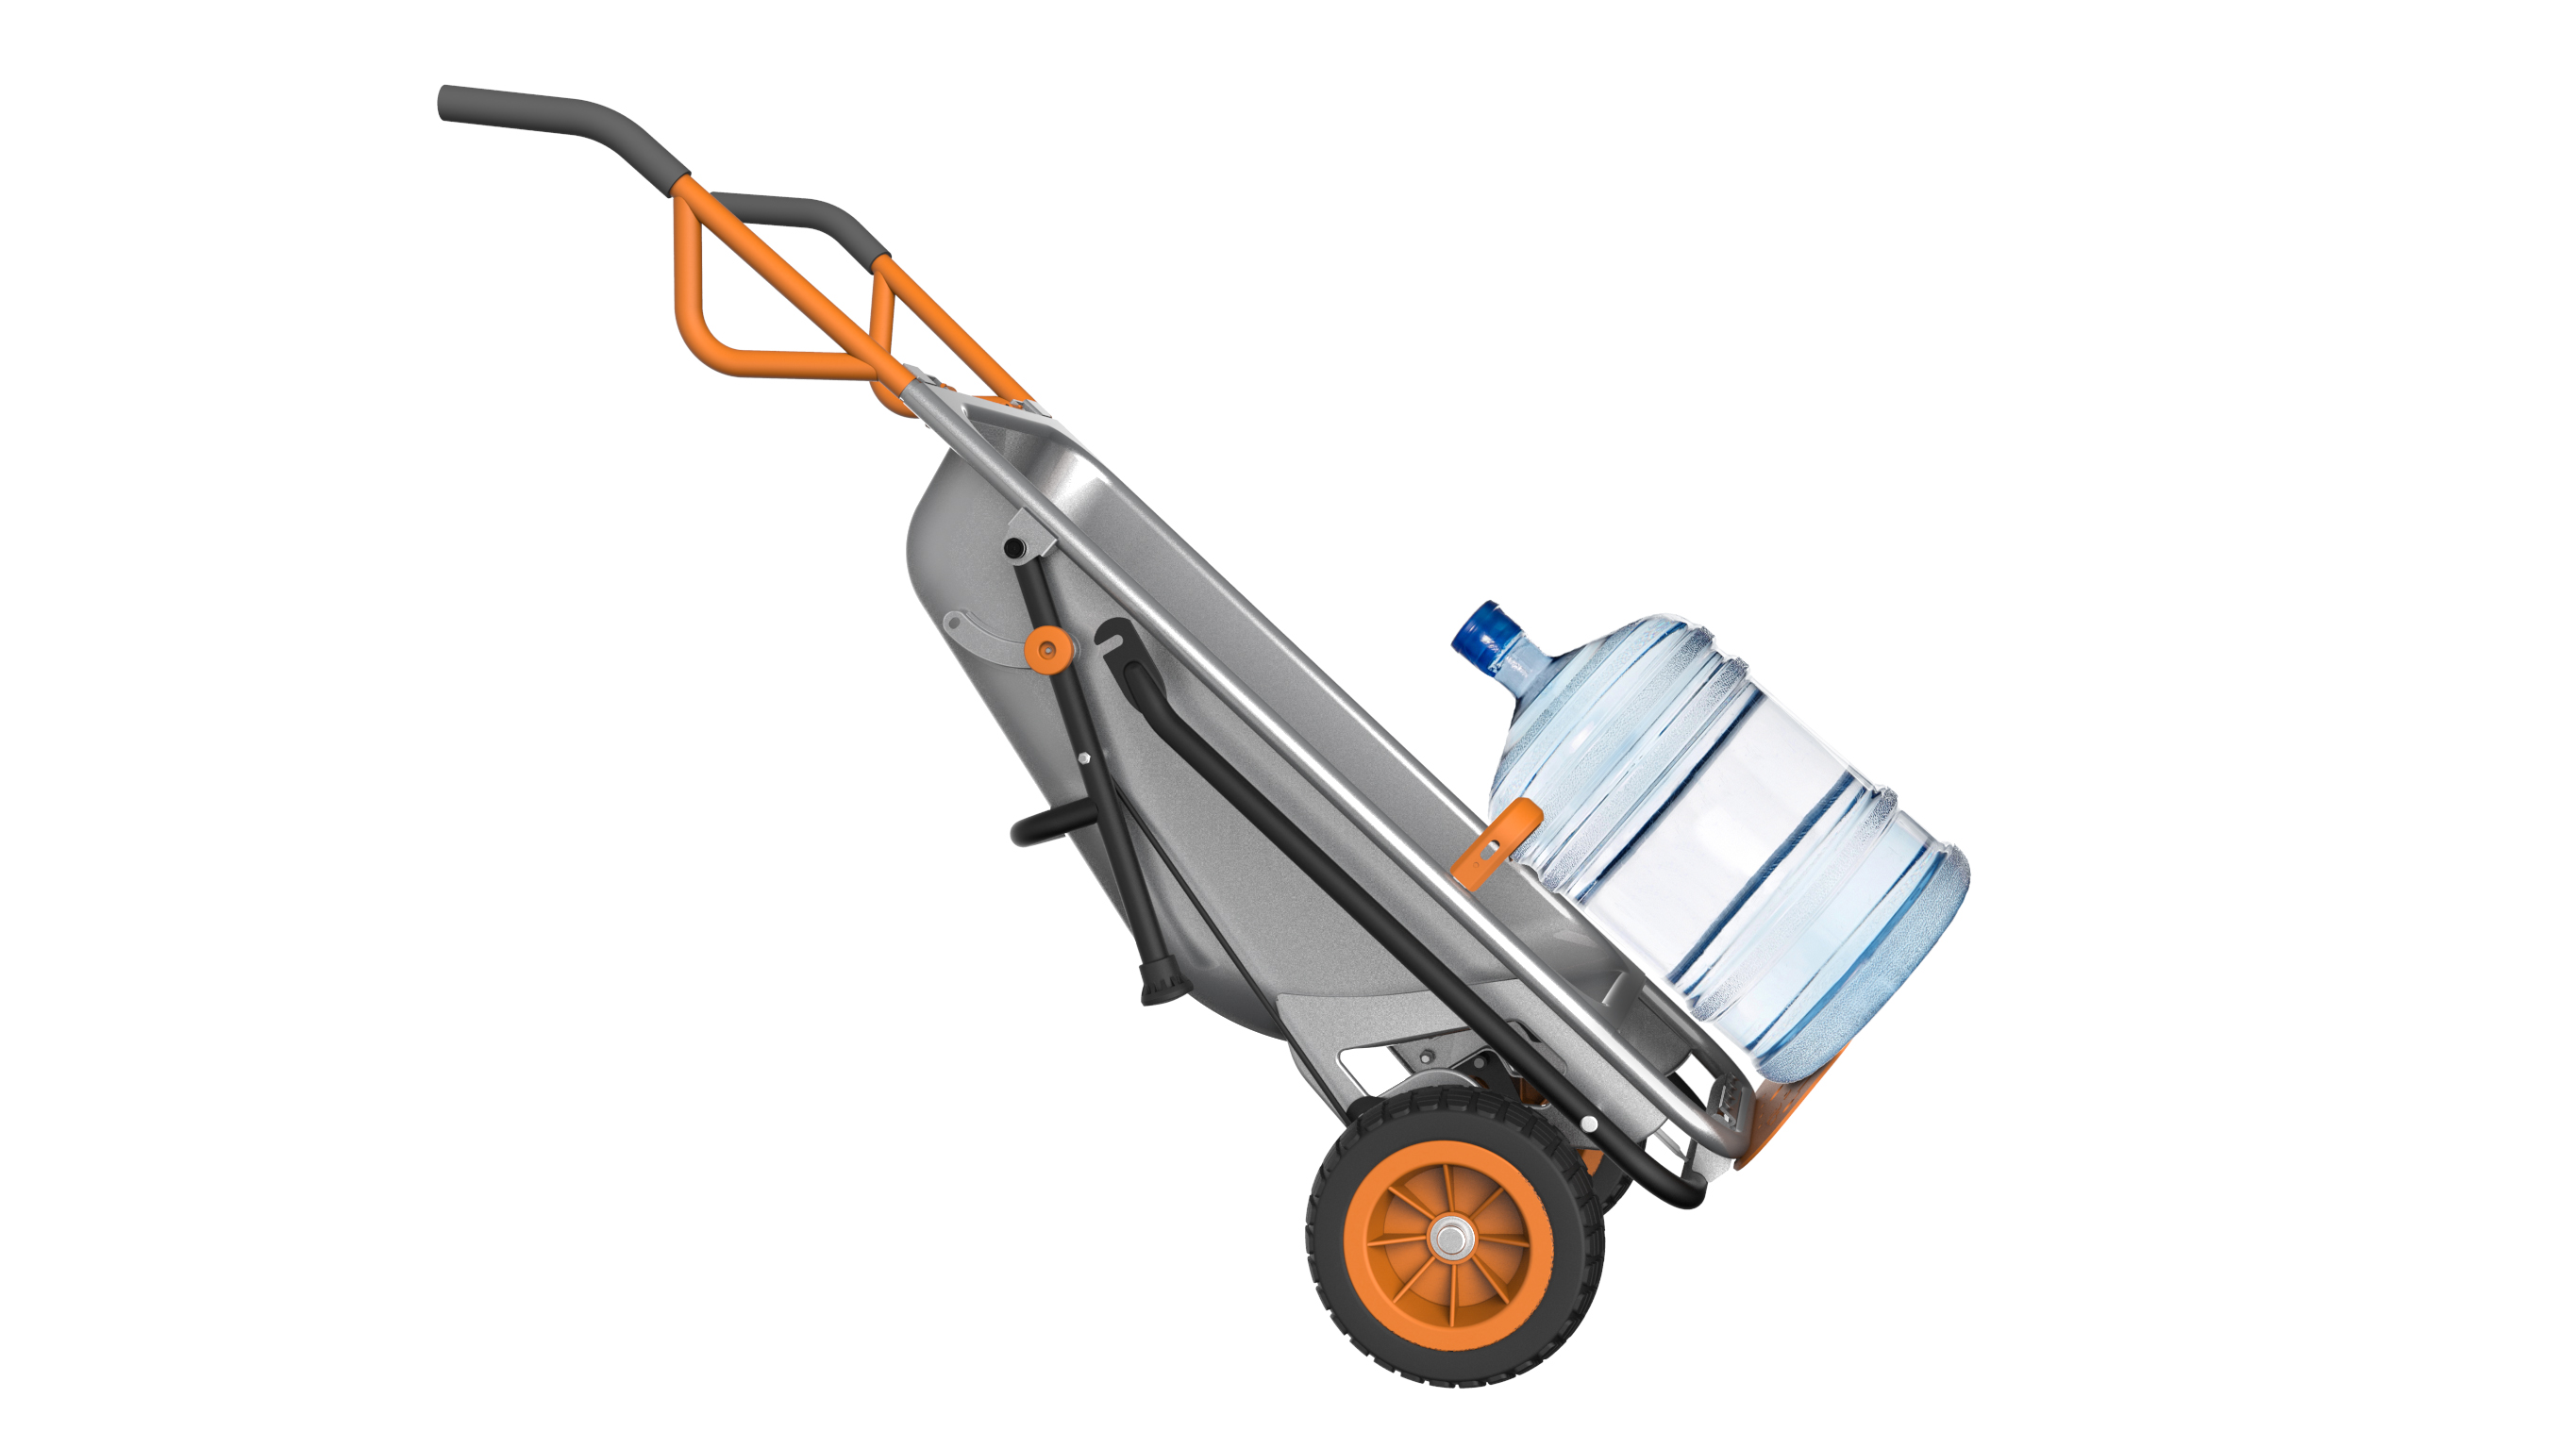 WORX AeroCart comes with cylinder accessory for transporting water jugs and propane tanks.